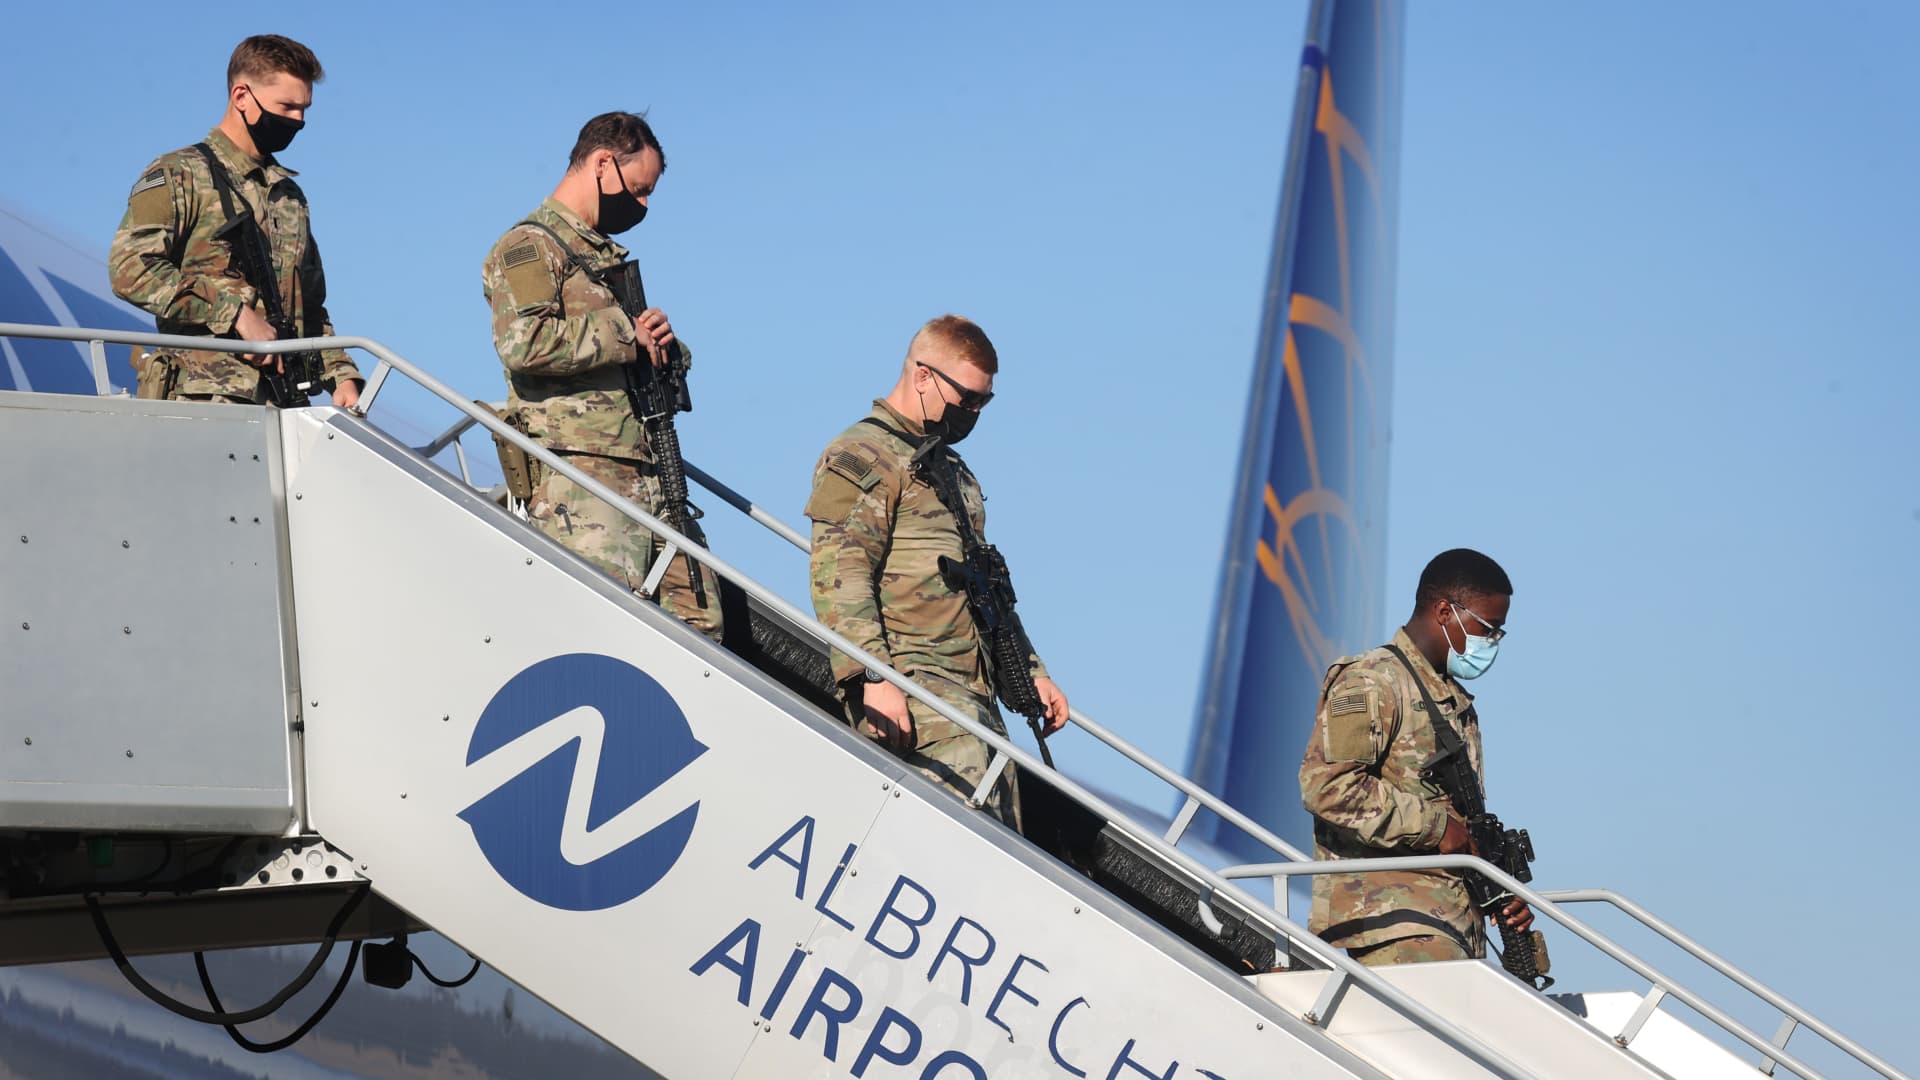 U.S. soldiers leave a Boeing 767-300 that has just landed at Albrecht Dürer Airport.